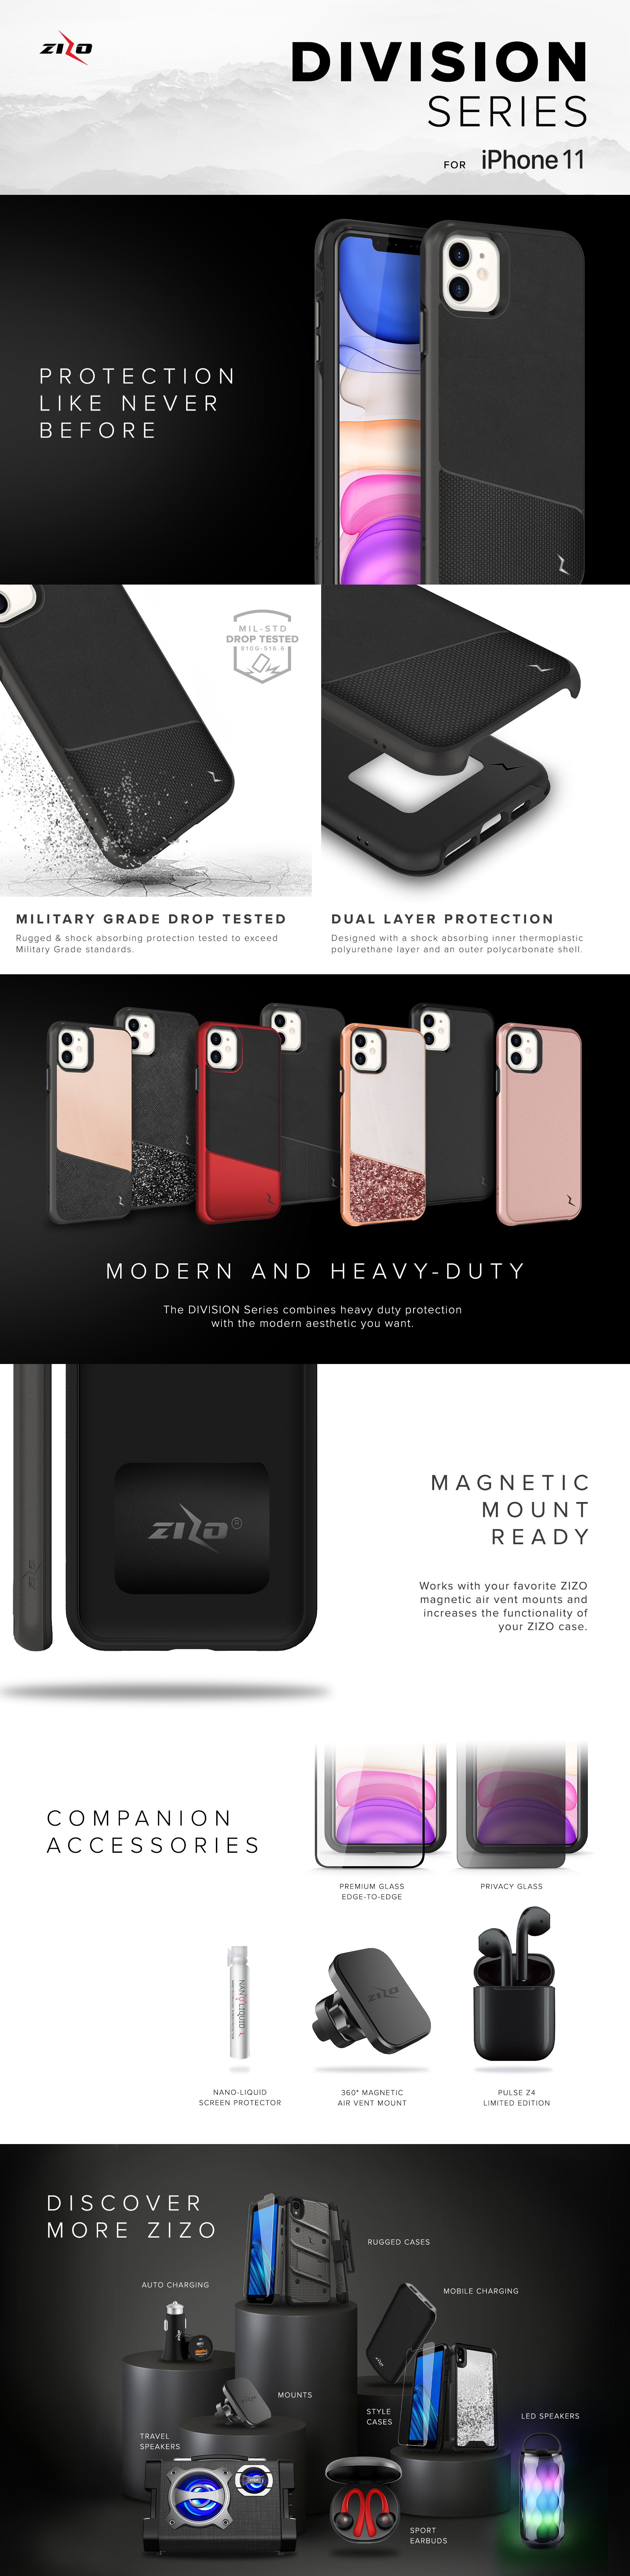 Discover the ZIZO Division Series iPhone 11 Collection